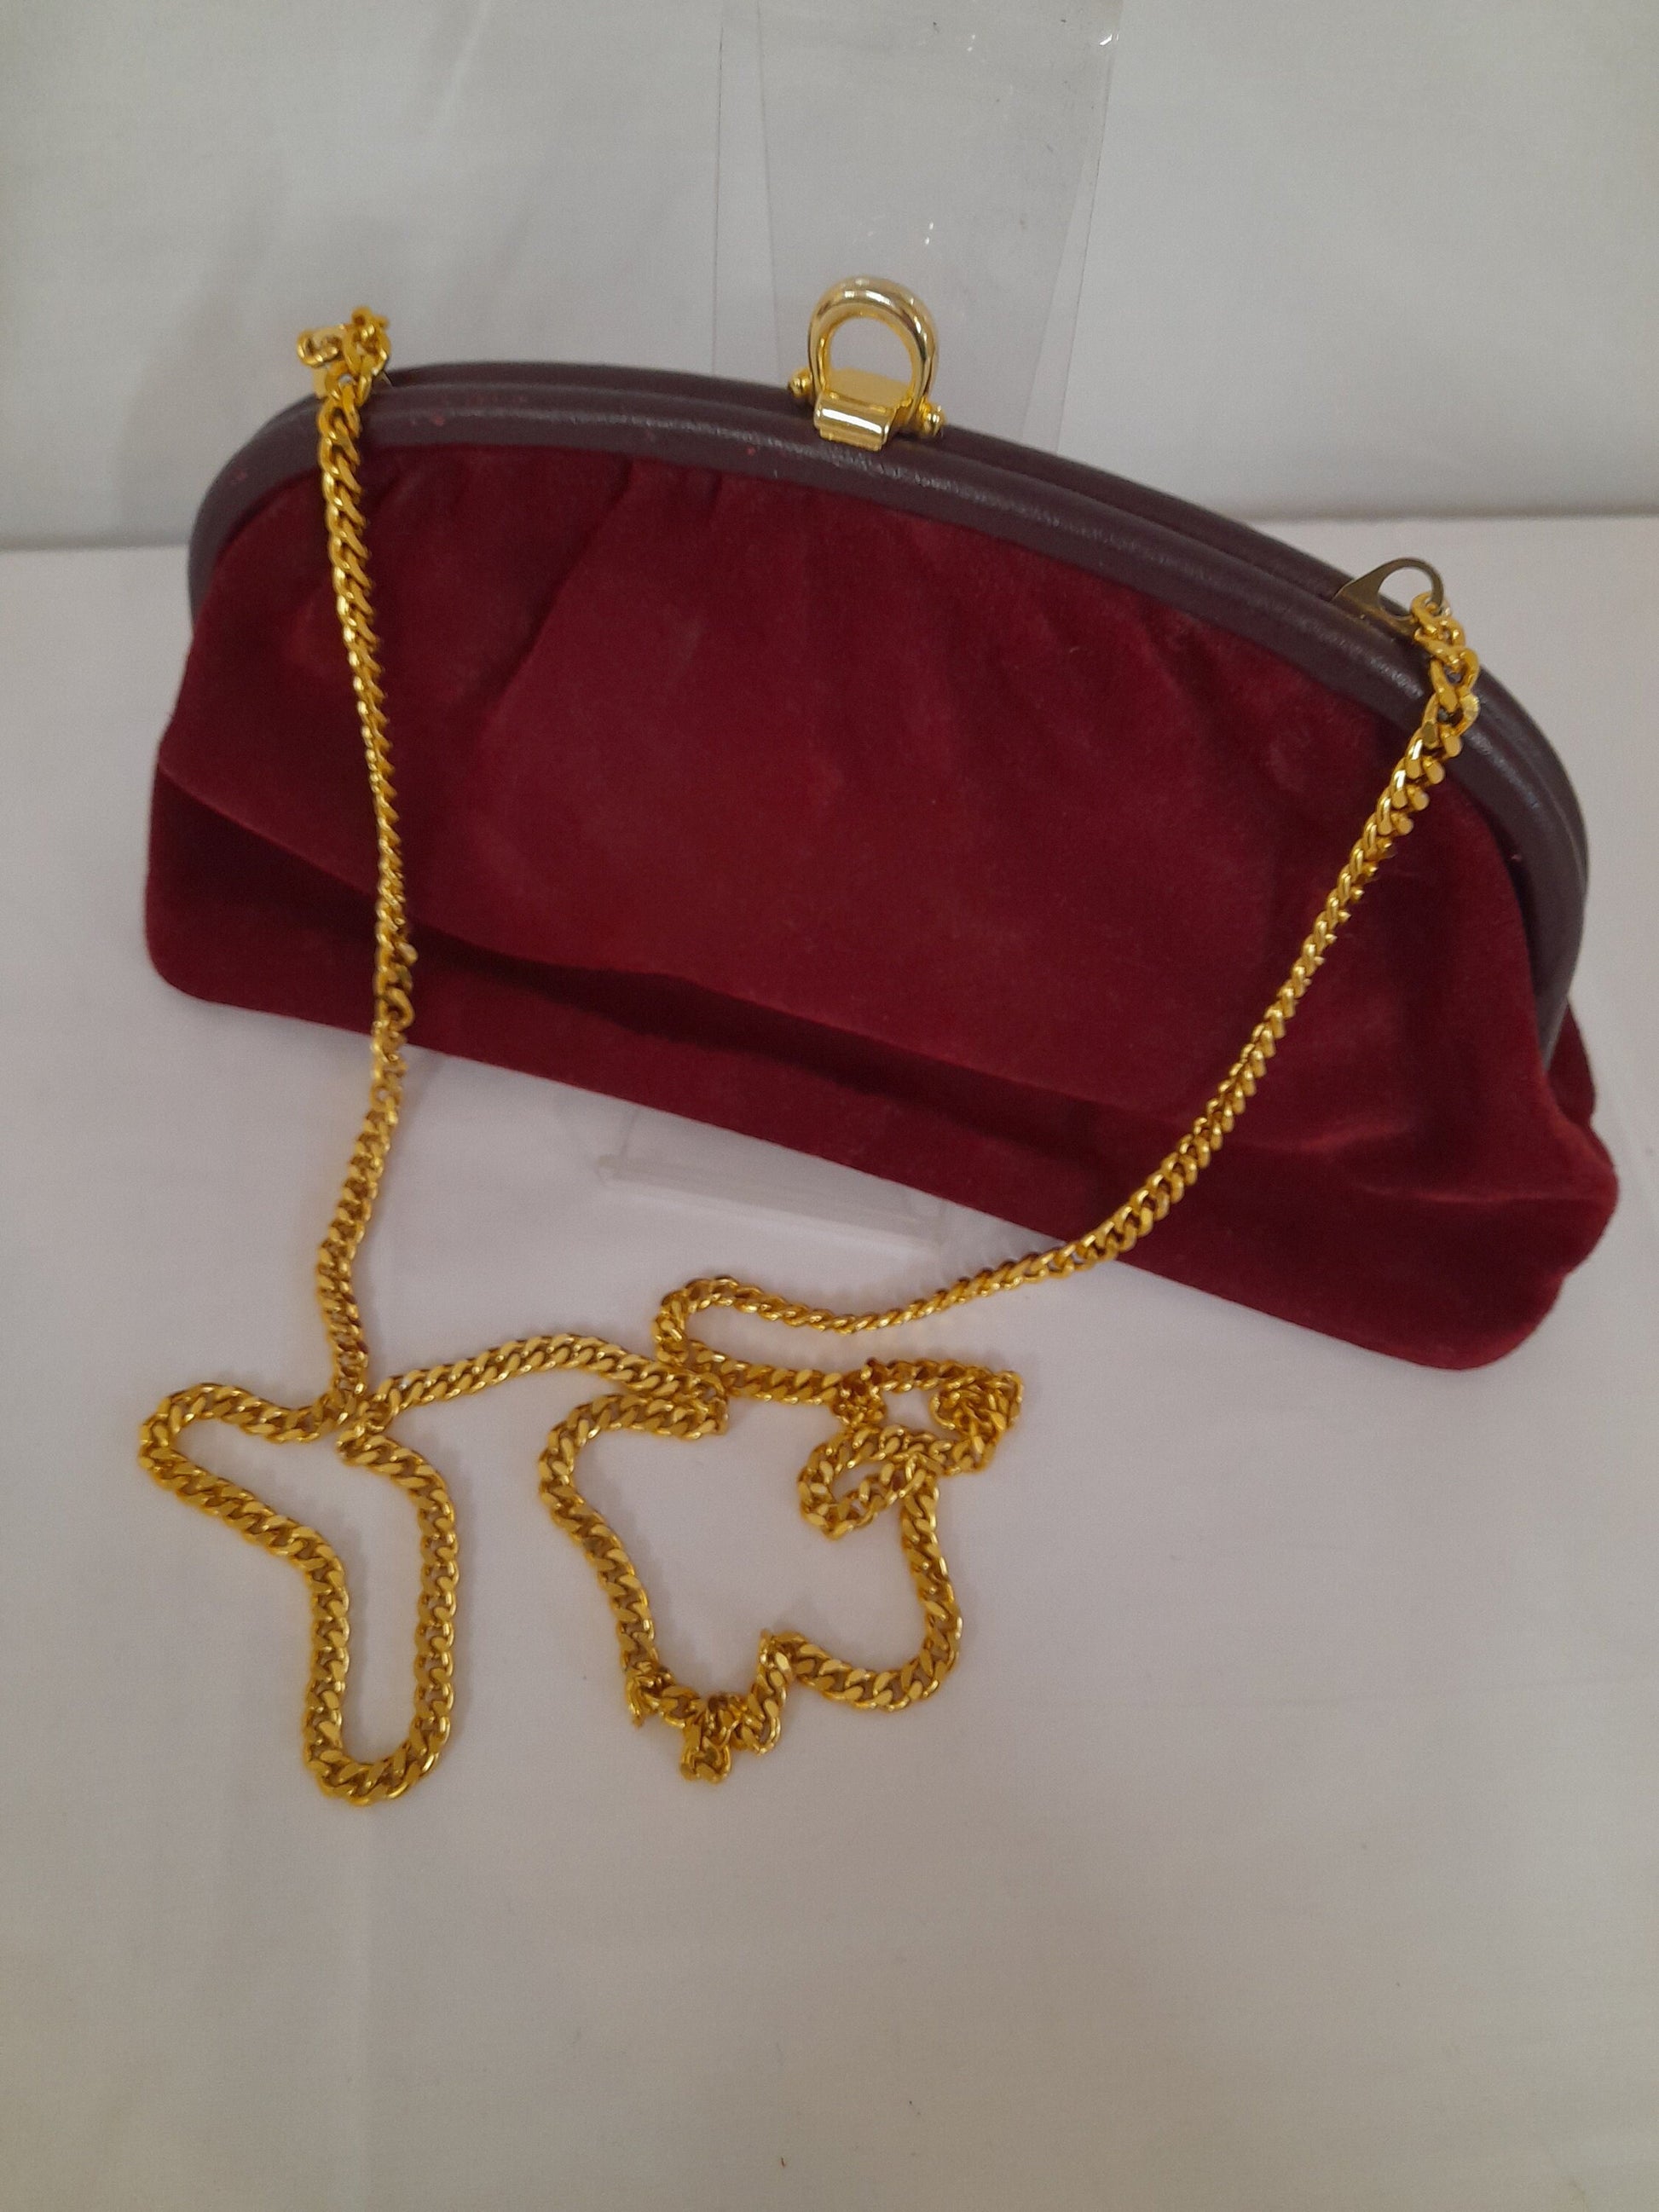 Vintage Red Suede Evening Bag With Gold Chain